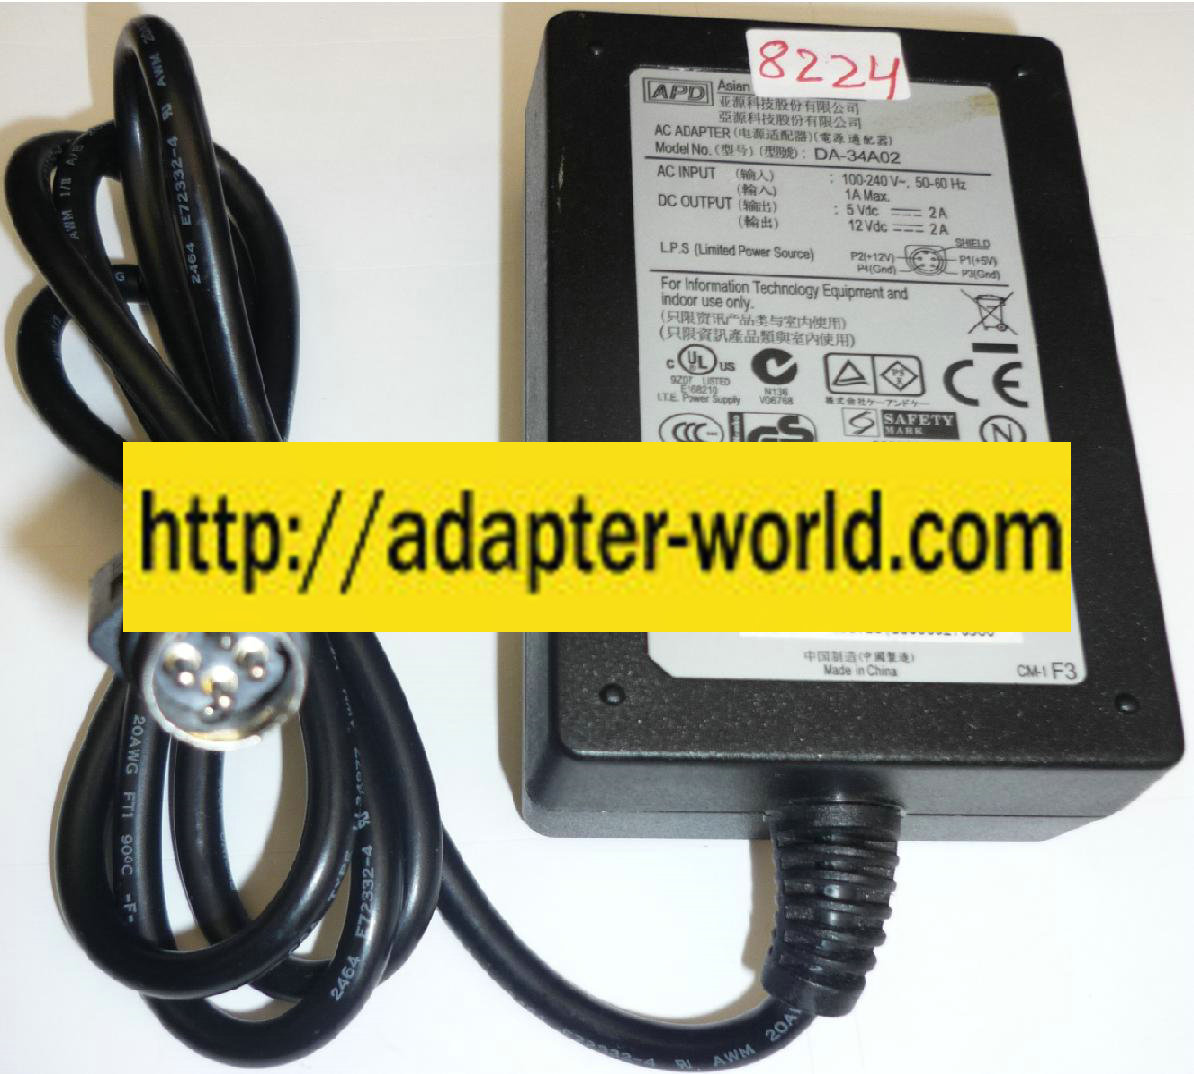 APD DA-34A02 AC ADAPTER NEW 9mm DIN 4PIN CONNECTOR 5VDC 12VDC 2